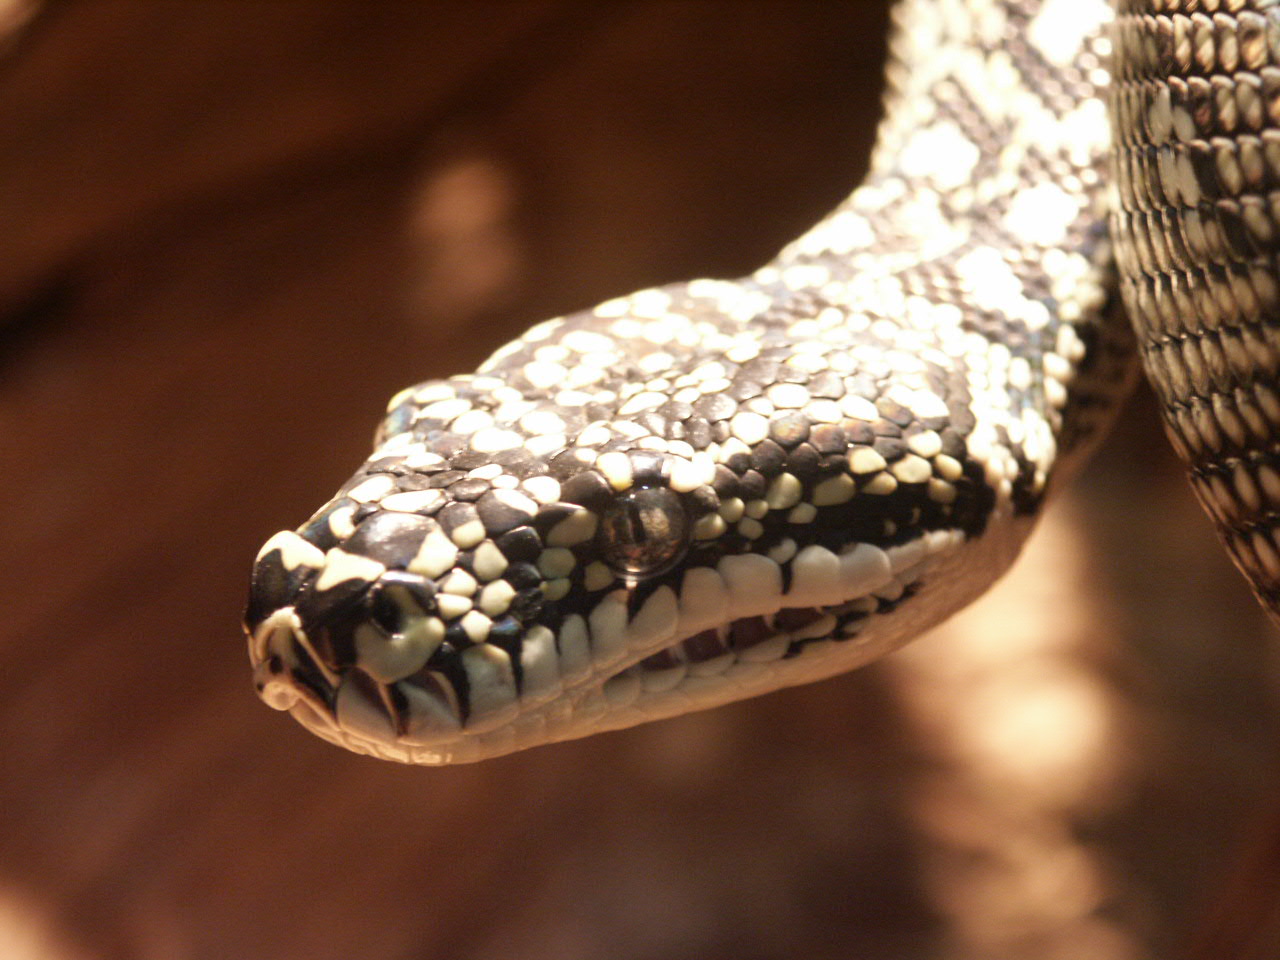 My observation of the Diamond Python was very exciting. 